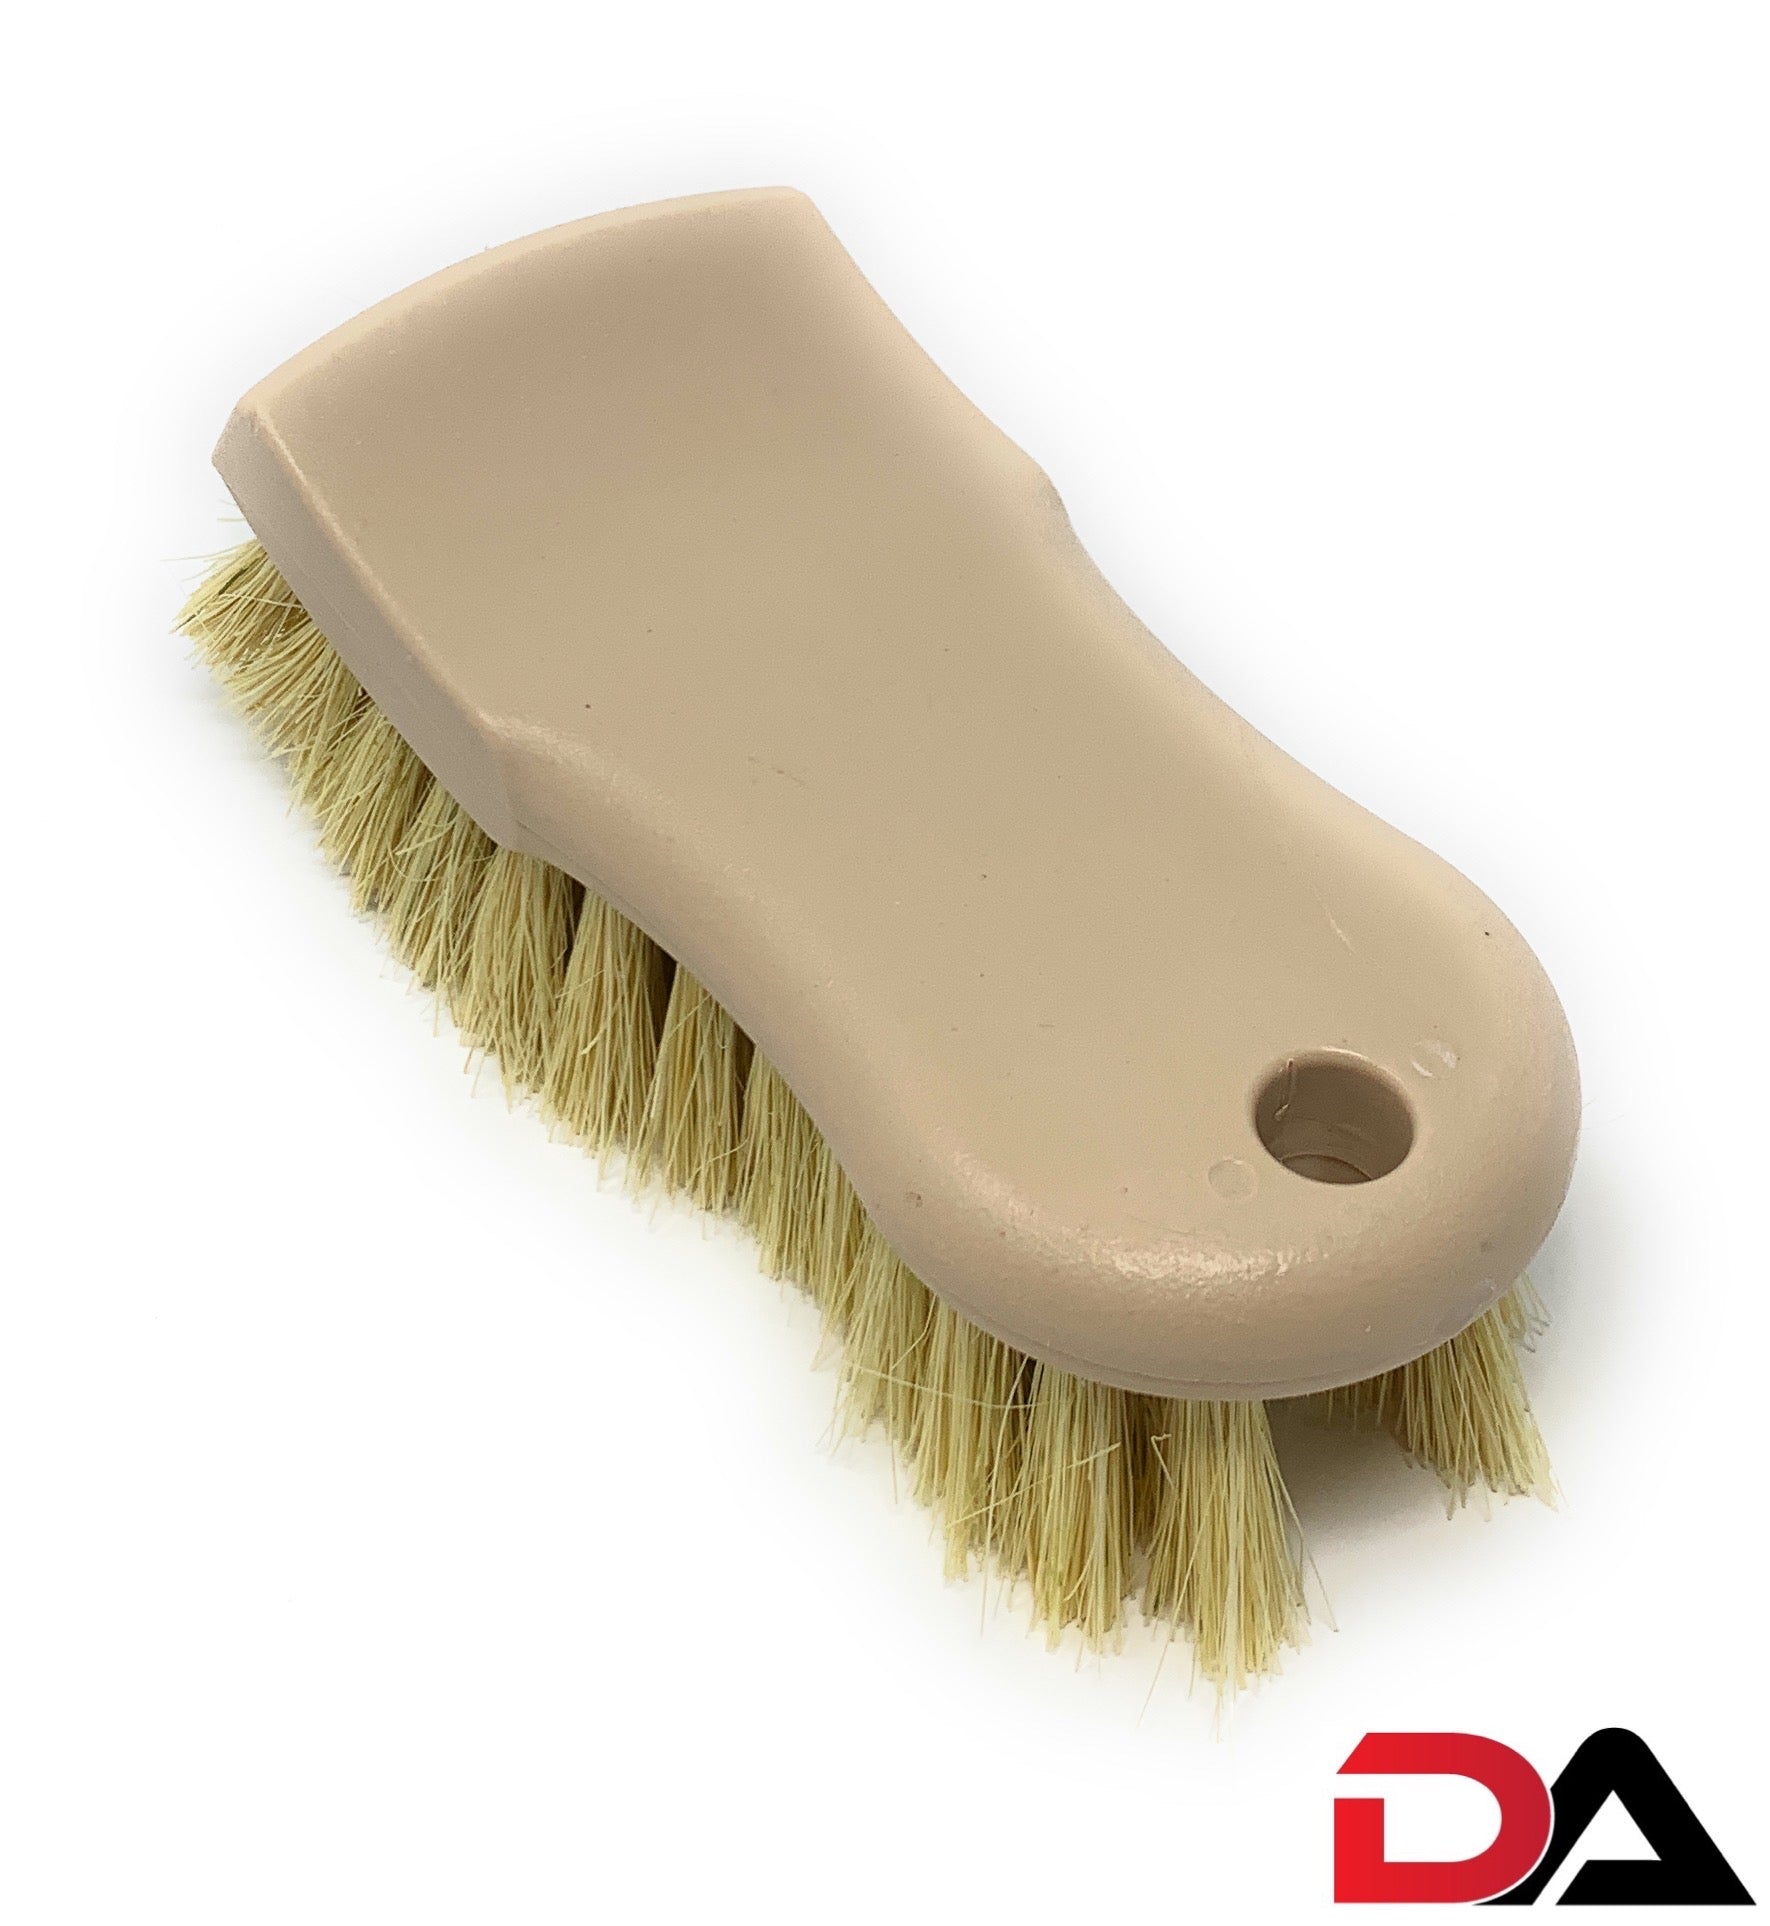  Veemoon 1pc Bed Brush Hair Drafting Brush Couch Cleaning Brush  Carpet Cleaning Brush Carpet Brushes for Cleaning Car Rug Sofa Bed Cleaning  Tool Artificial Fur Clothes Wooden Handle Brush : Health